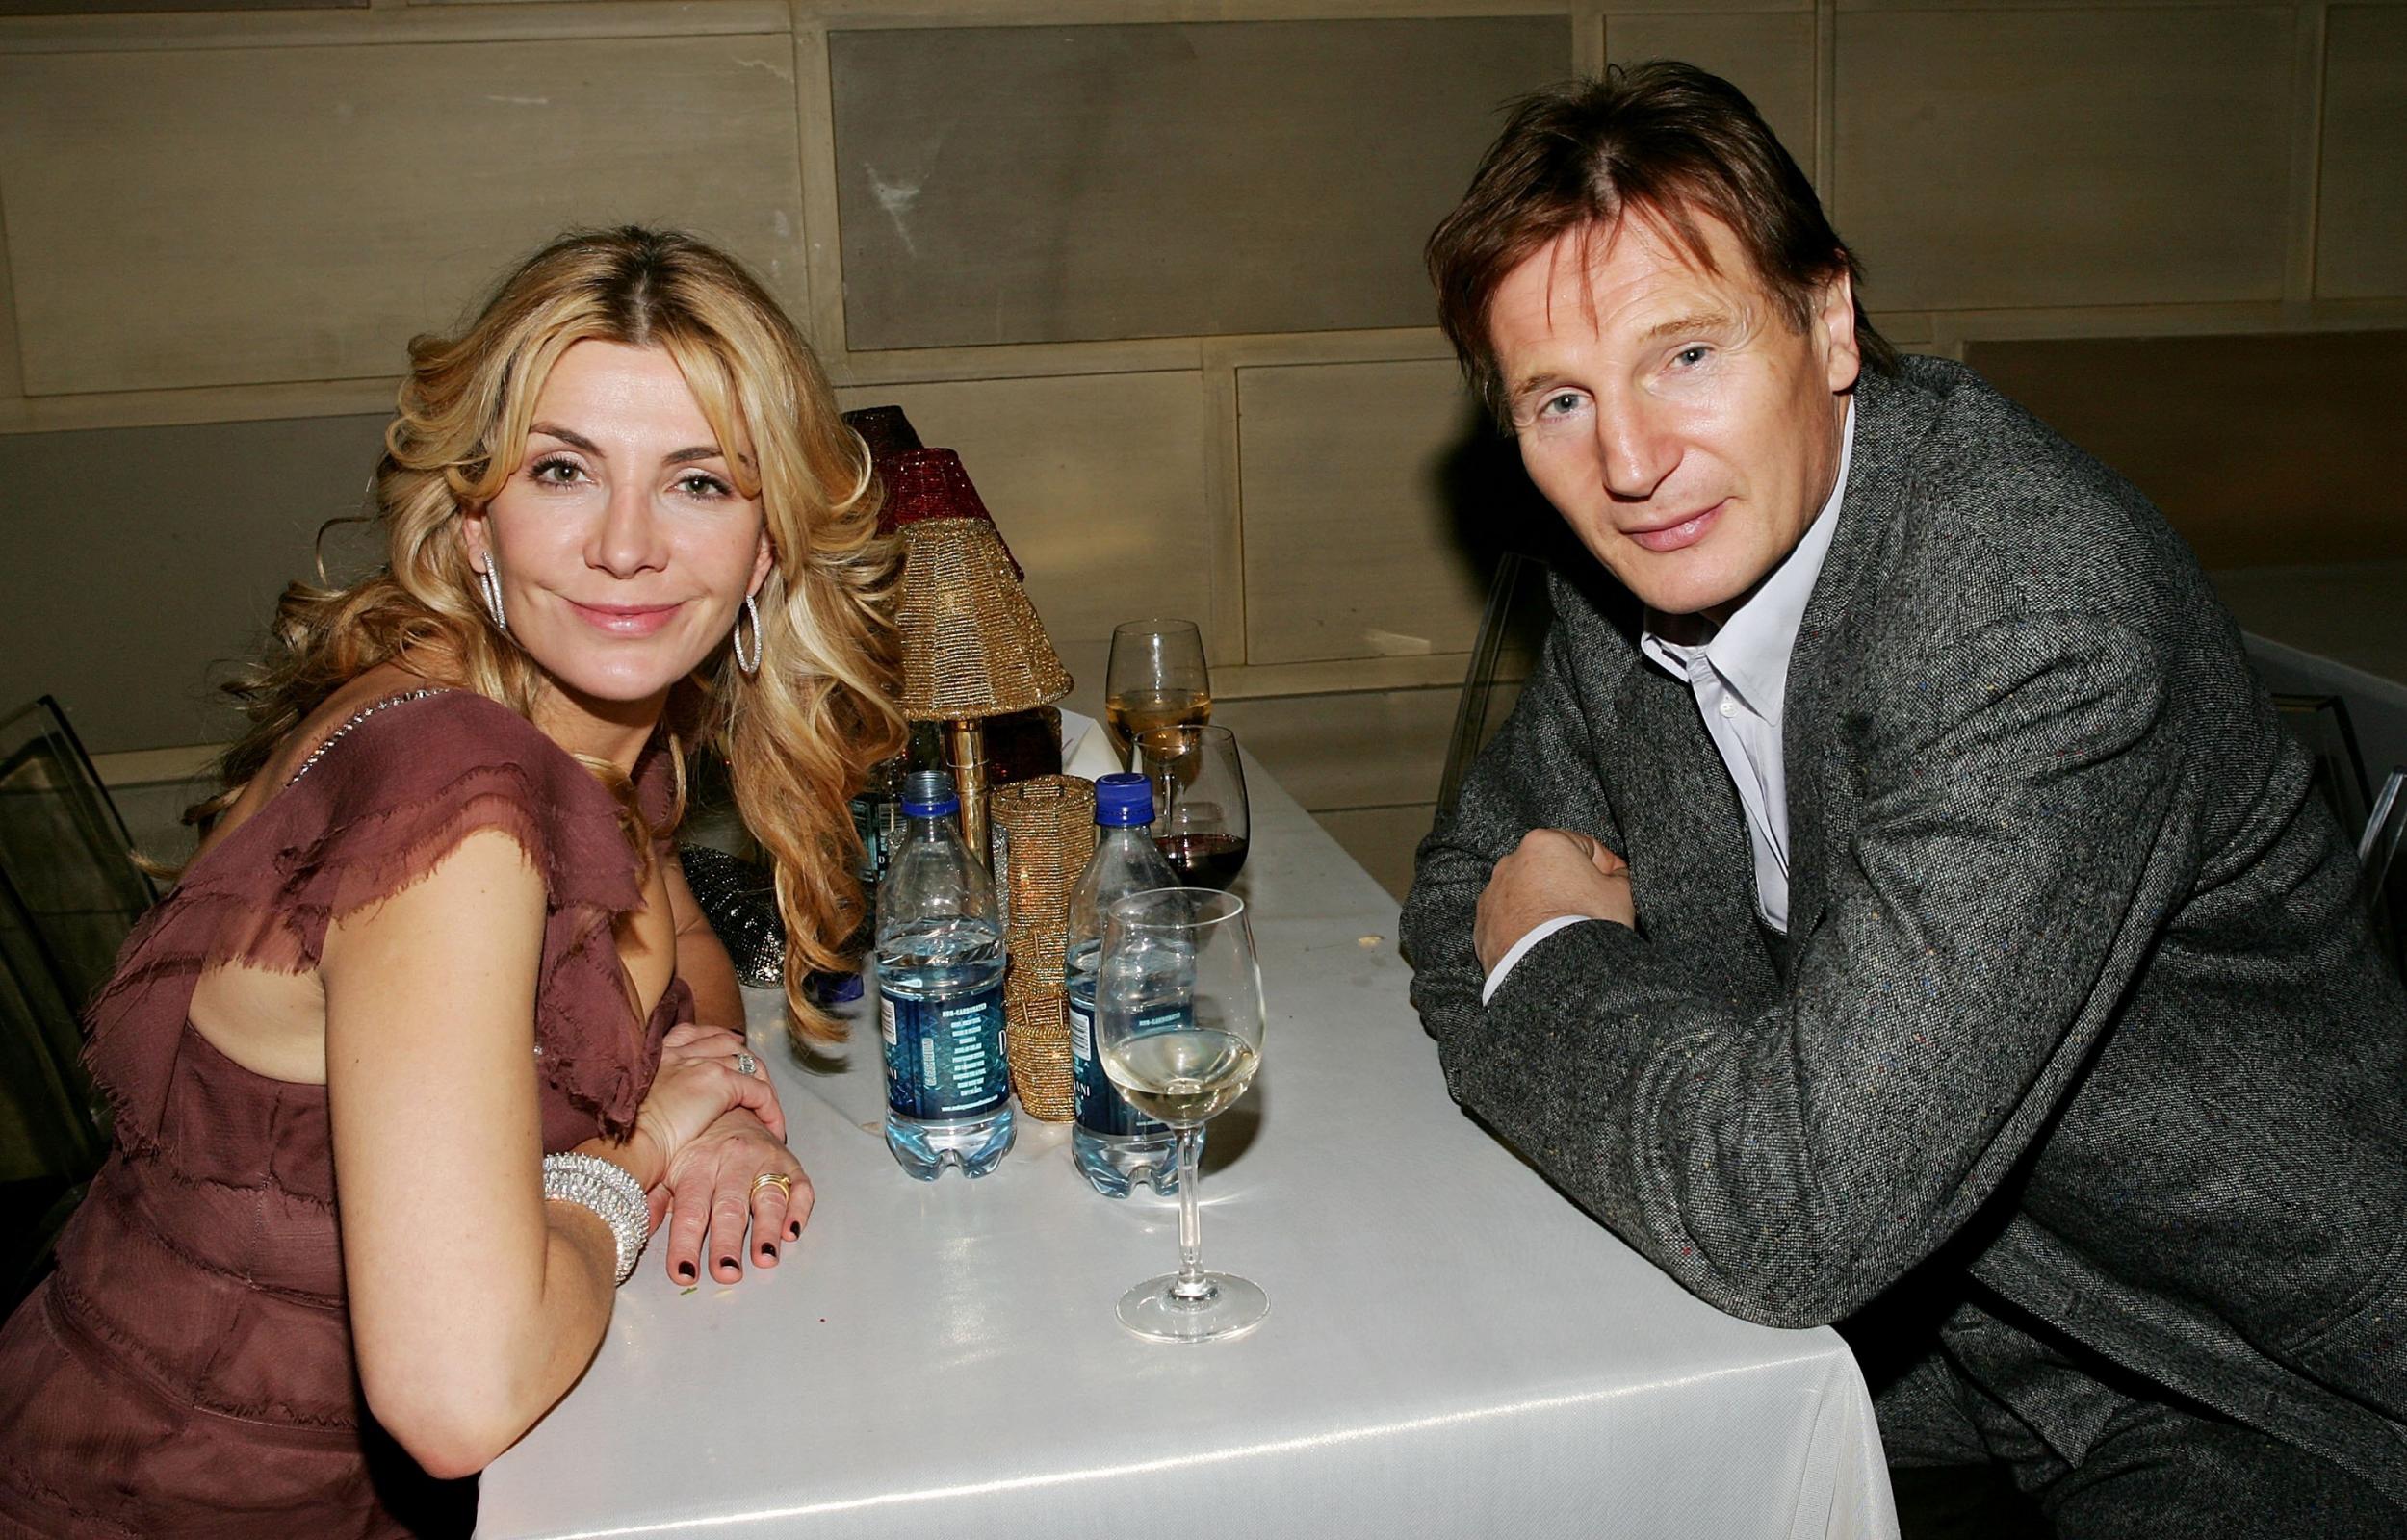 Richardson with her husband, Liam Neeson, in New York in 2004